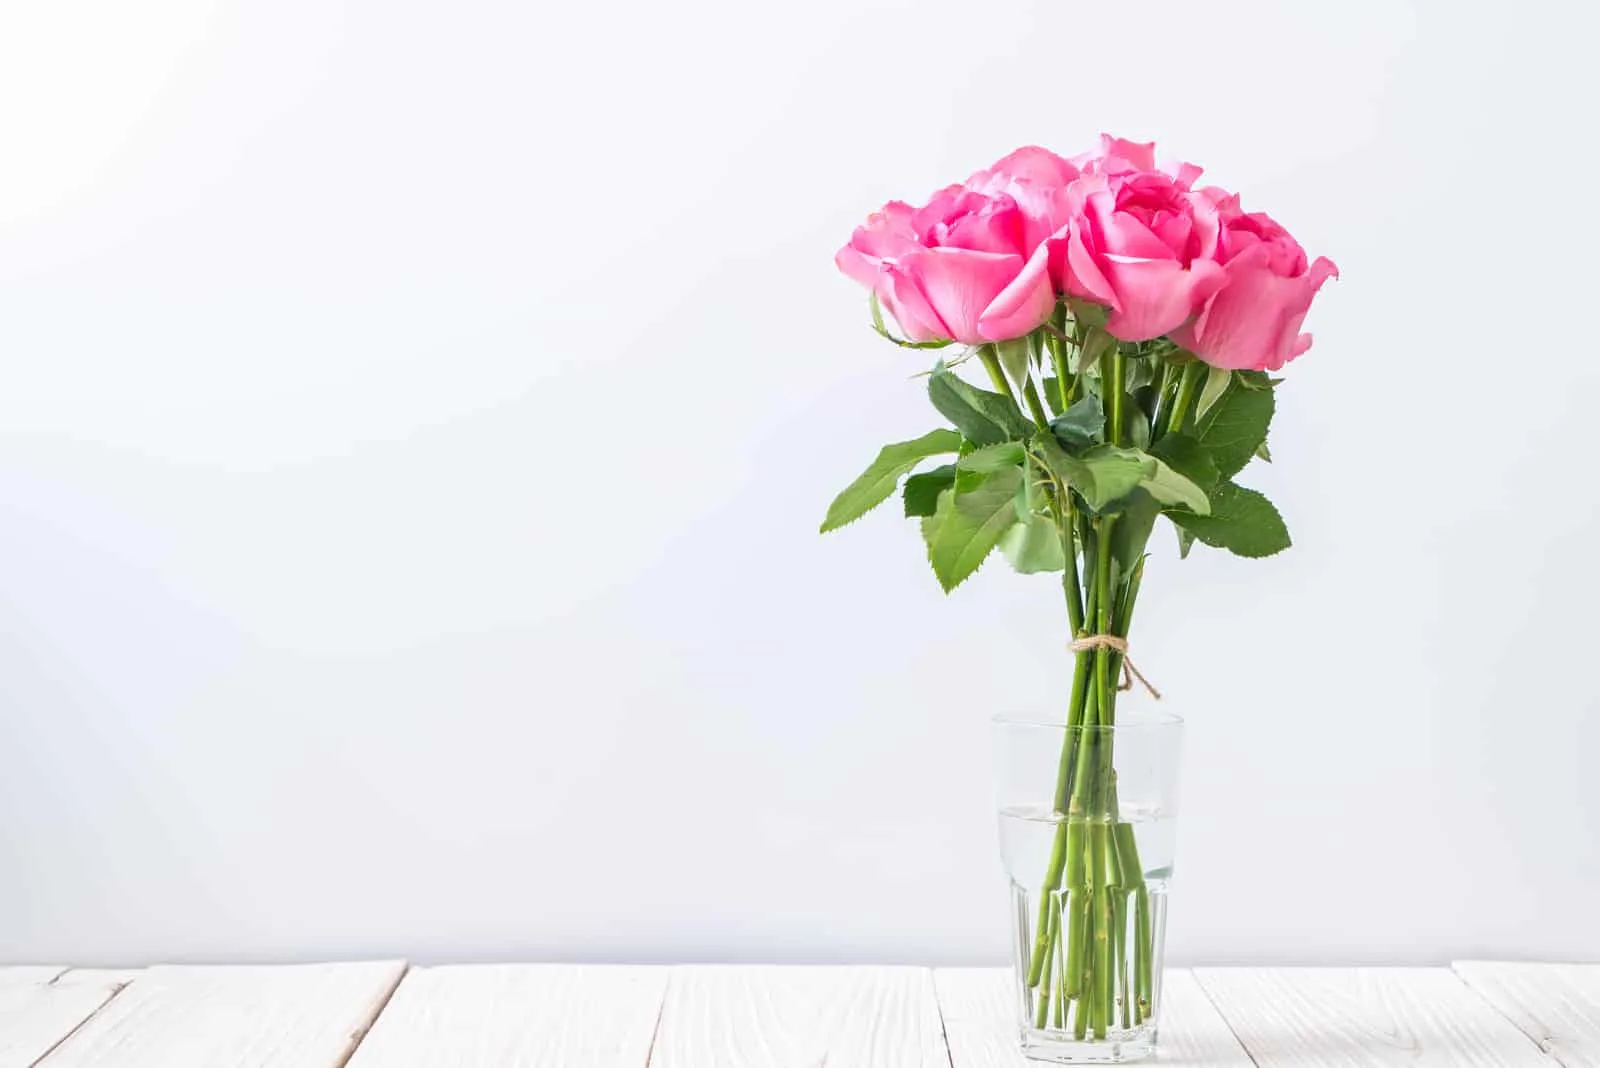 pink roses in vase on wooden table